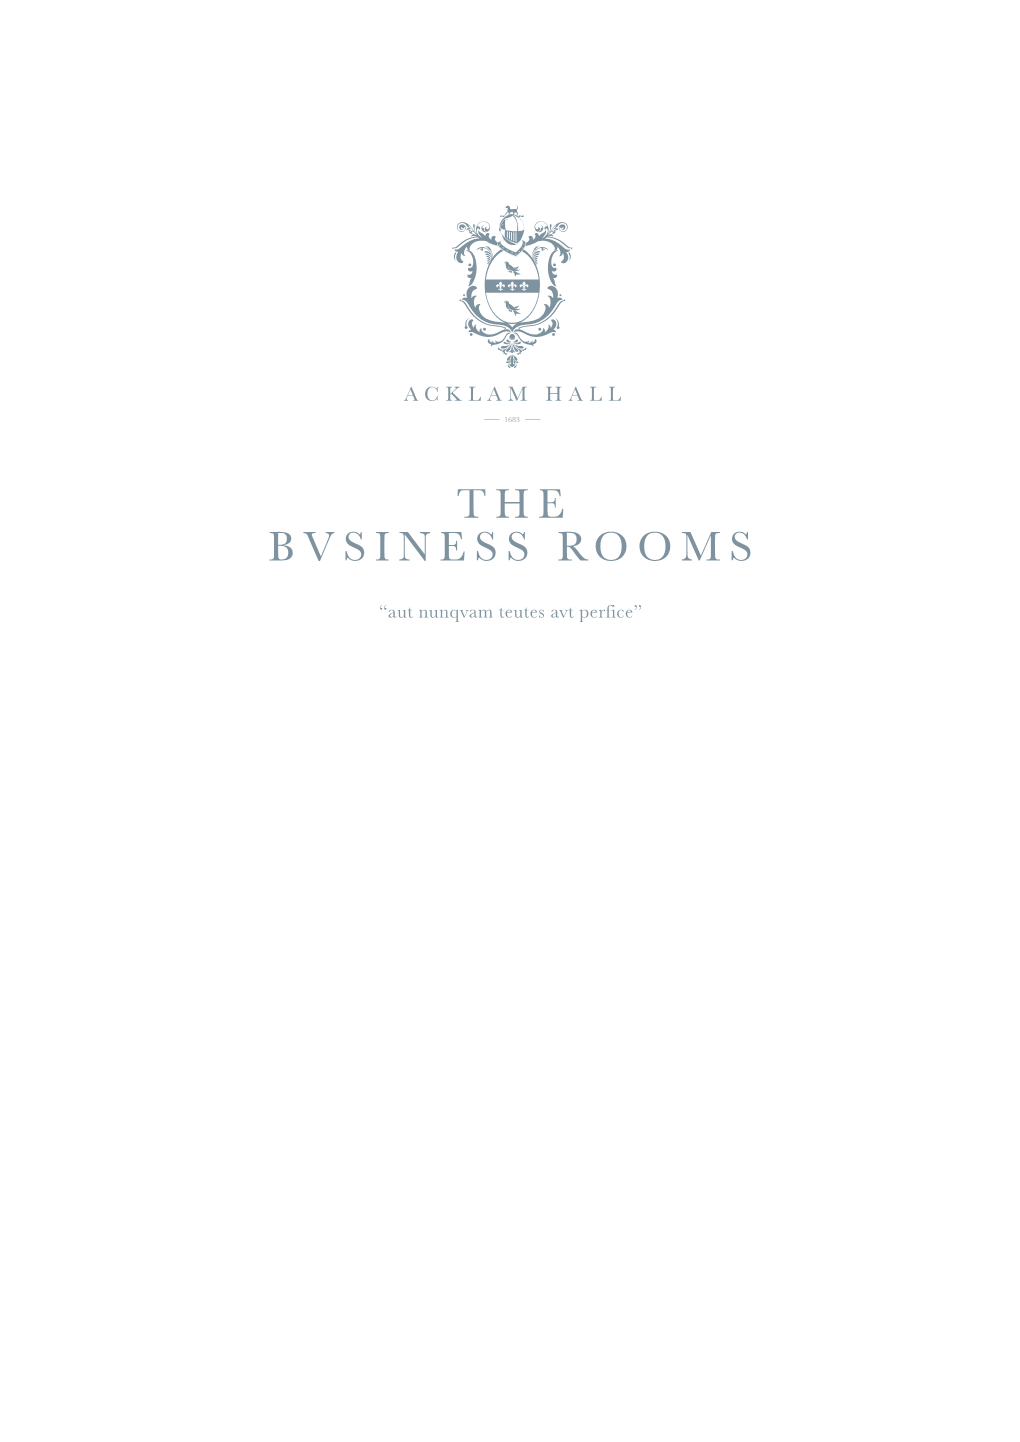 The Bvsiness Rooms